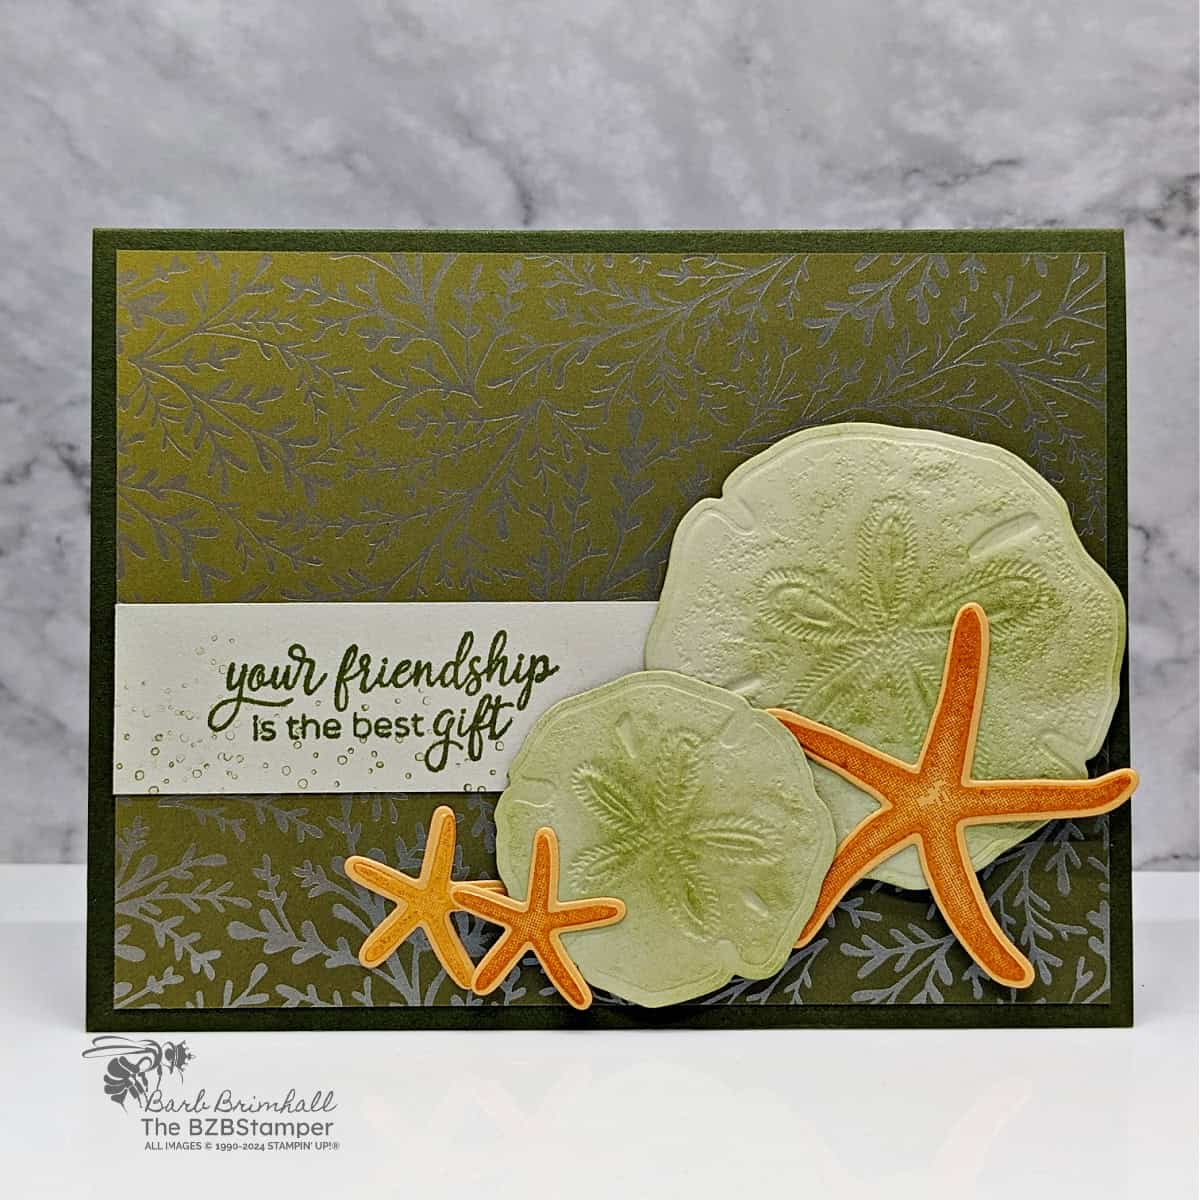 Handmade Seaside Wishes Friendship Card featuring seashells and starfish with pretty paper background.  Sentimet is "your friendship is the best gift."